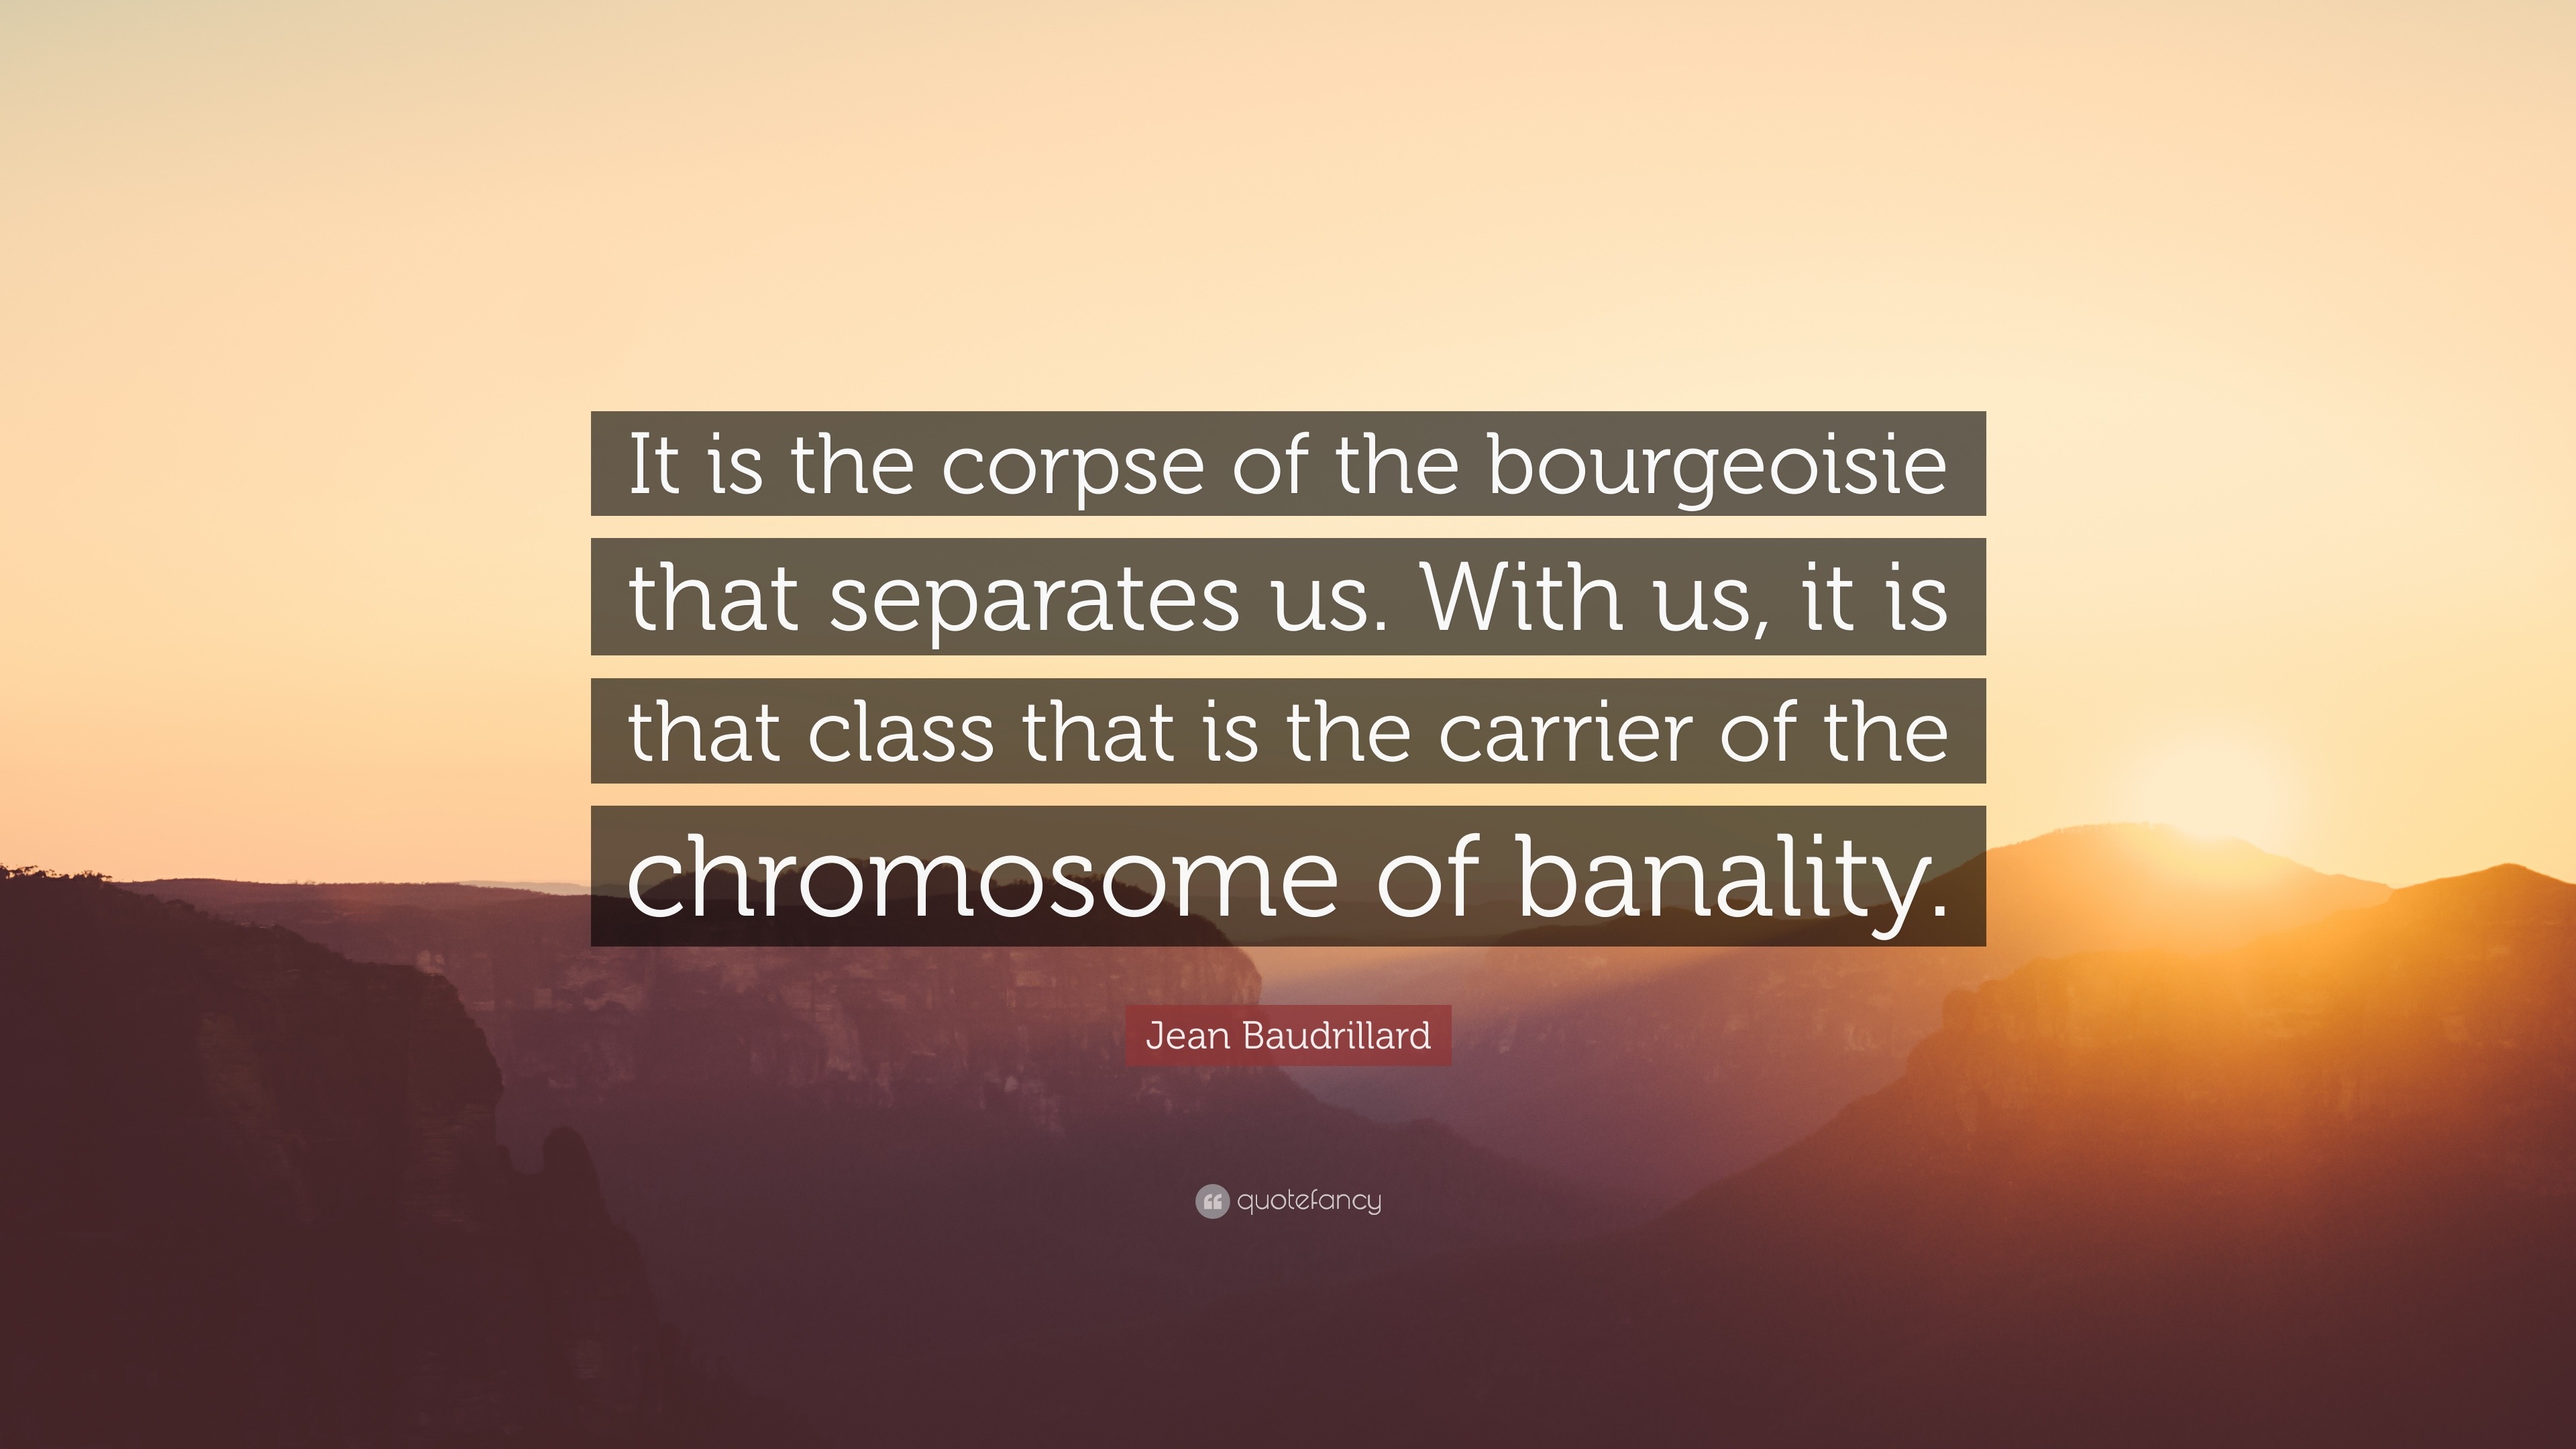 Jean Baudrillard Quote: “It is the corpse of the bourgeoisie that